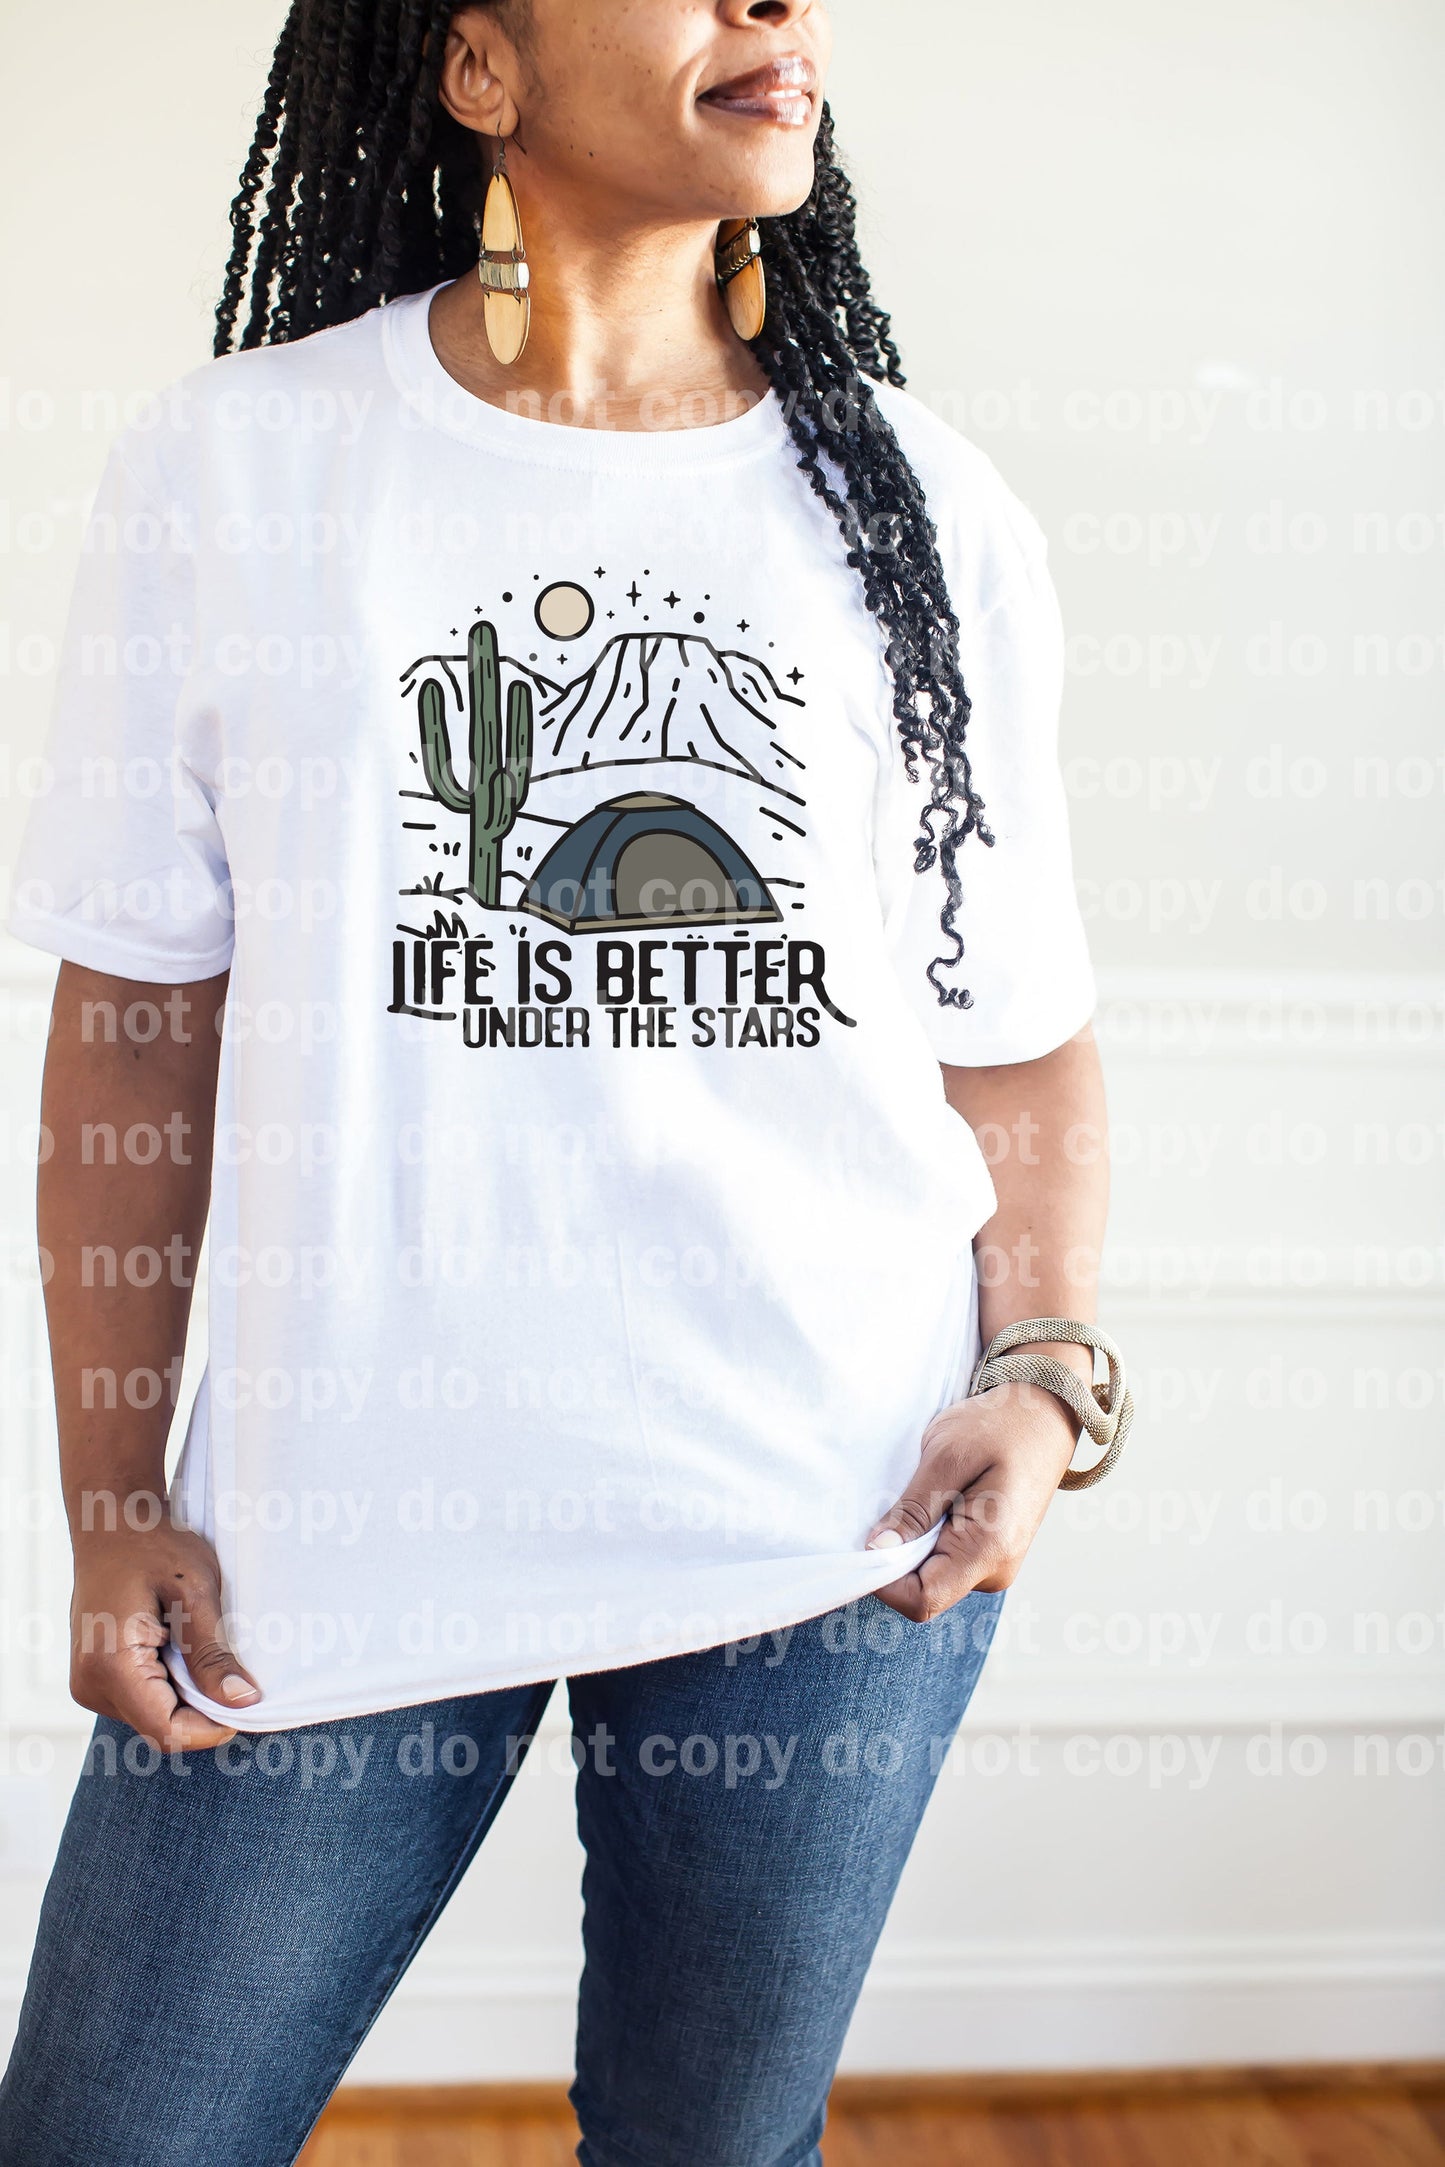 Life Is Better Under The Stars Dream Print or Sublimation Print